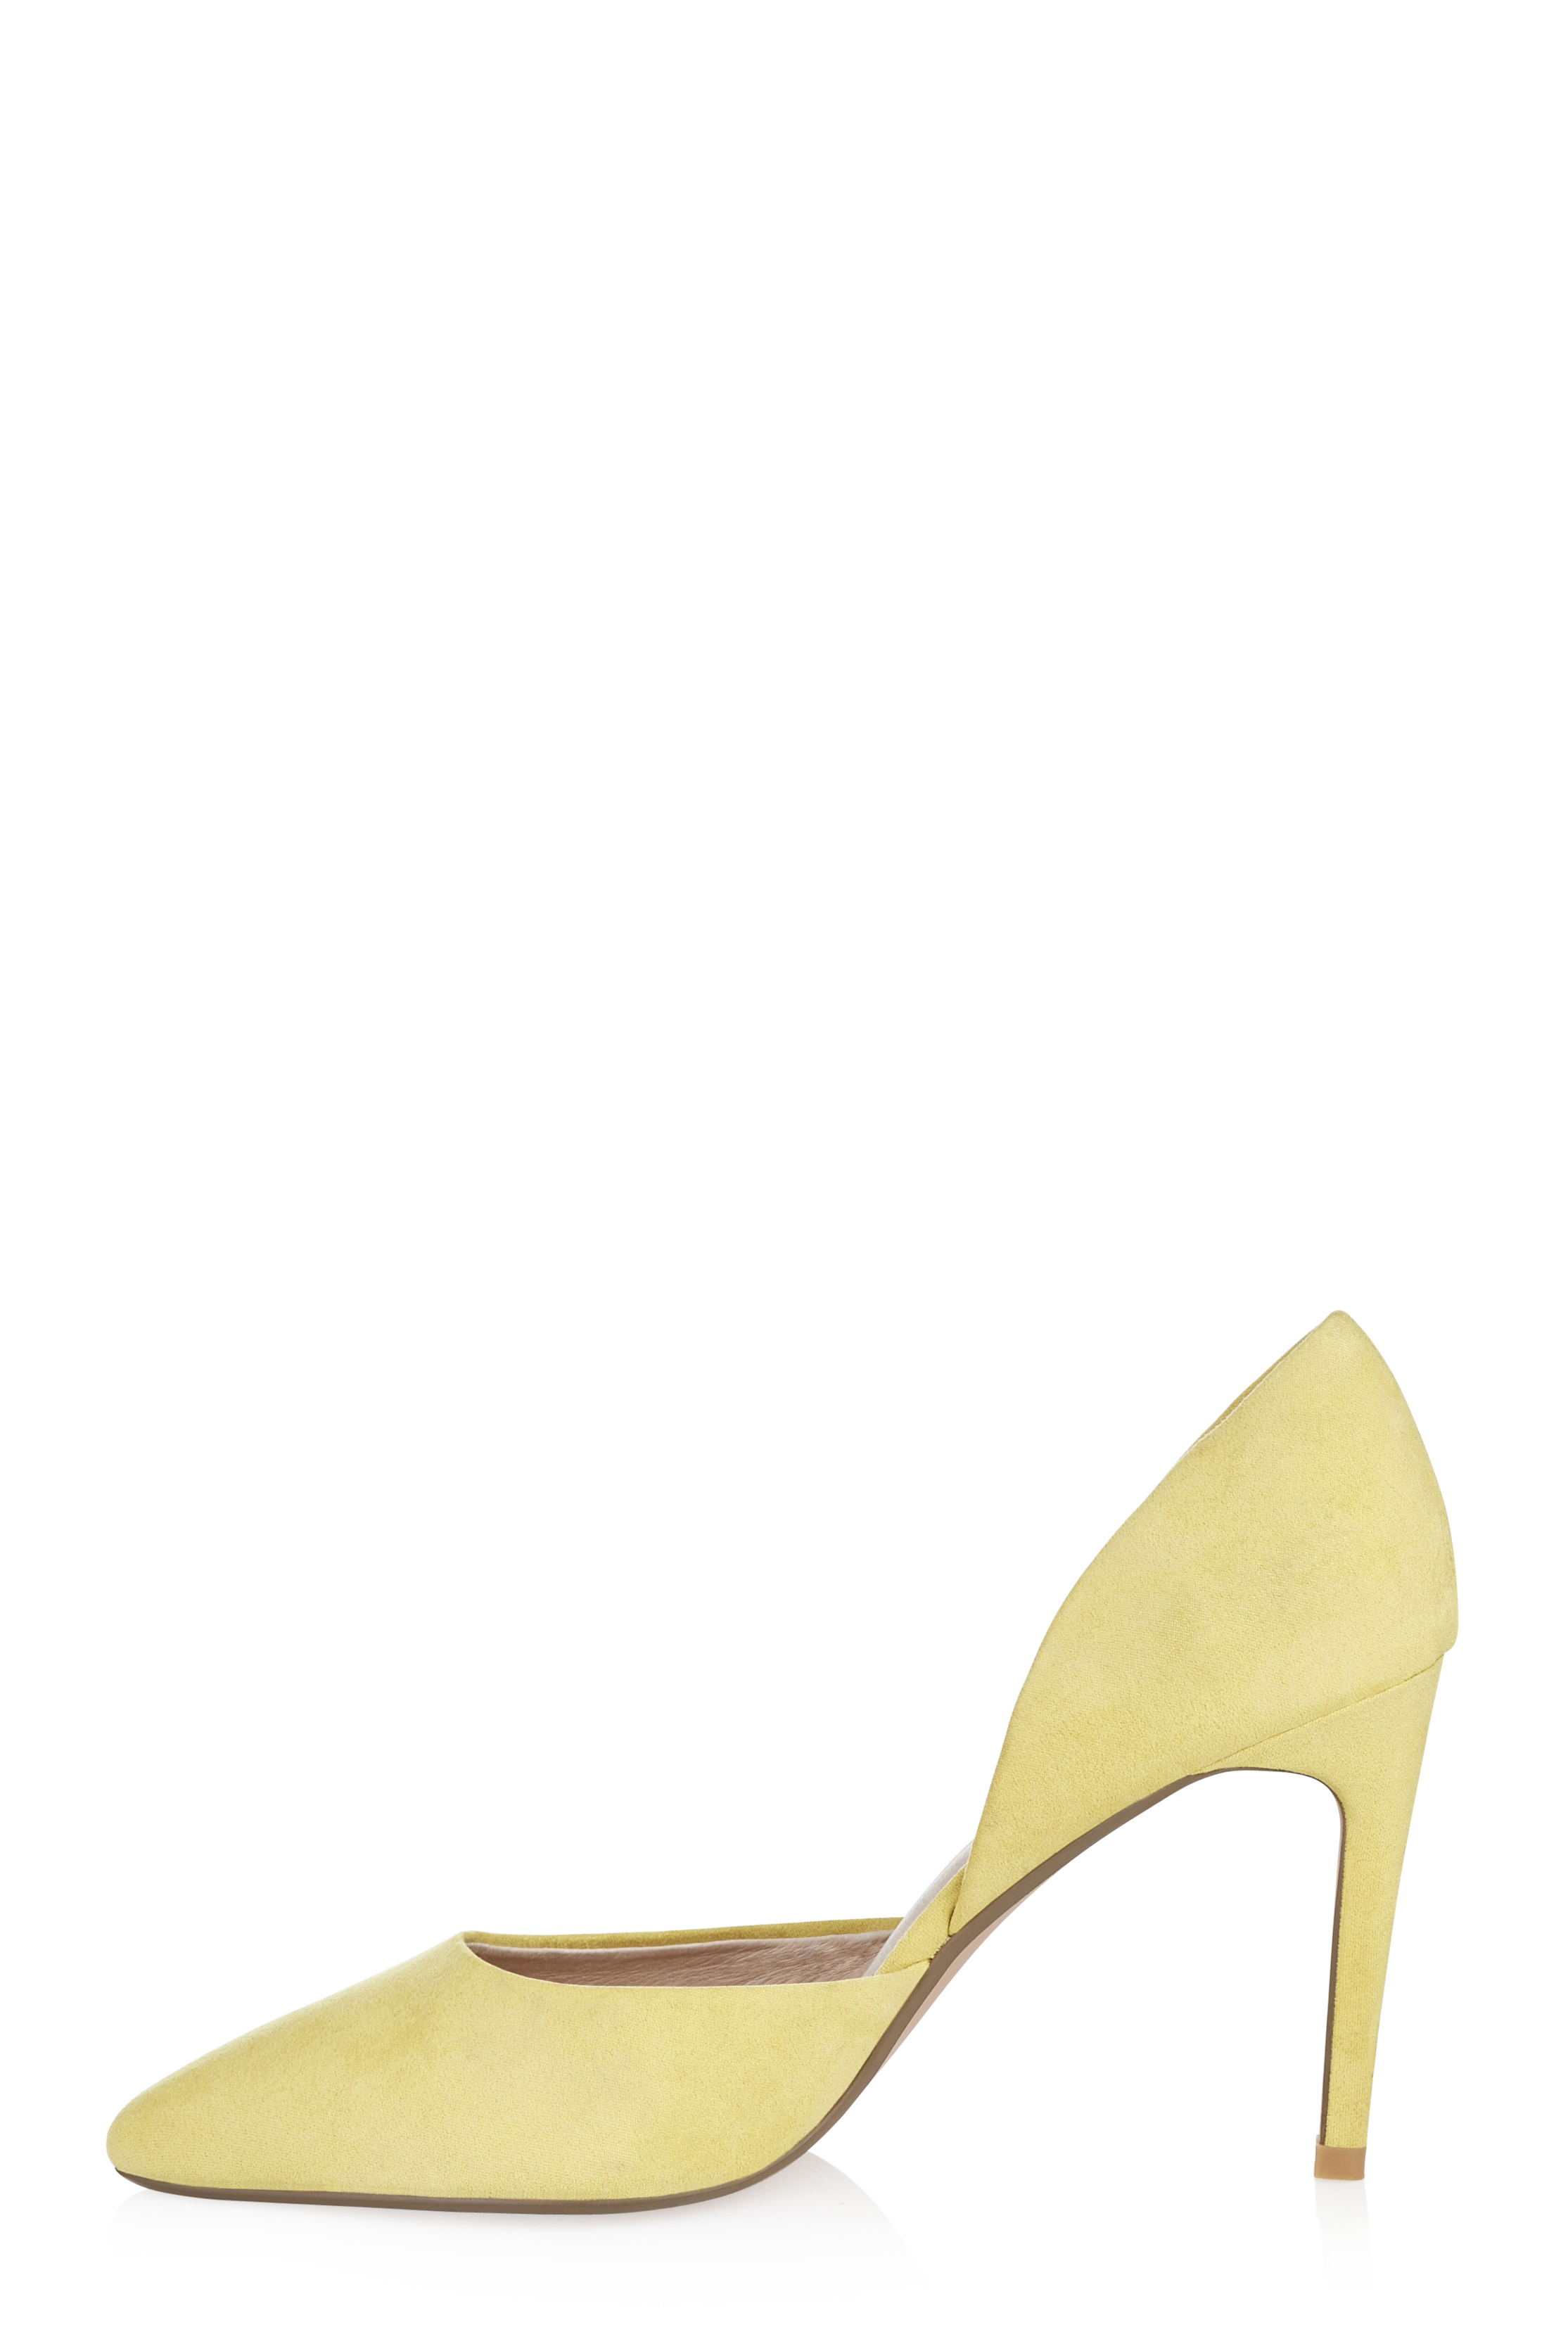 LTS Yellow Court Shoes | Long Tall Sally